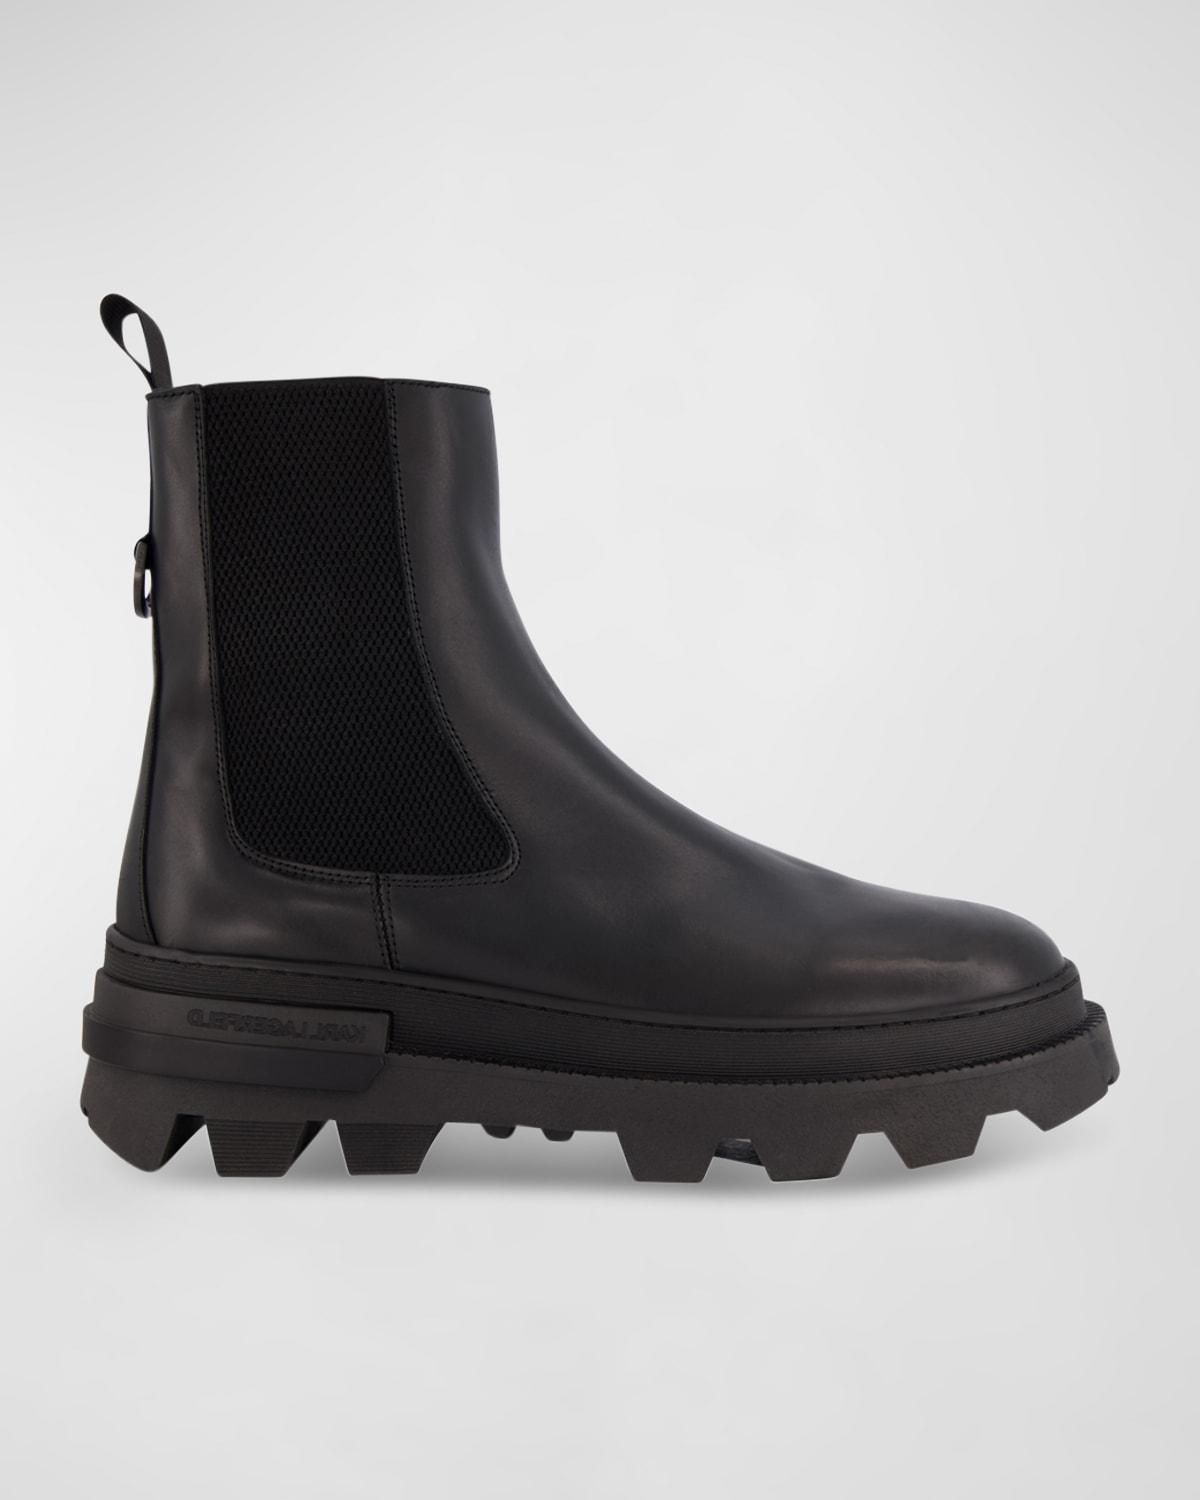 Karl Lagerfeld Paris White Label Chelsea Boot Product Image